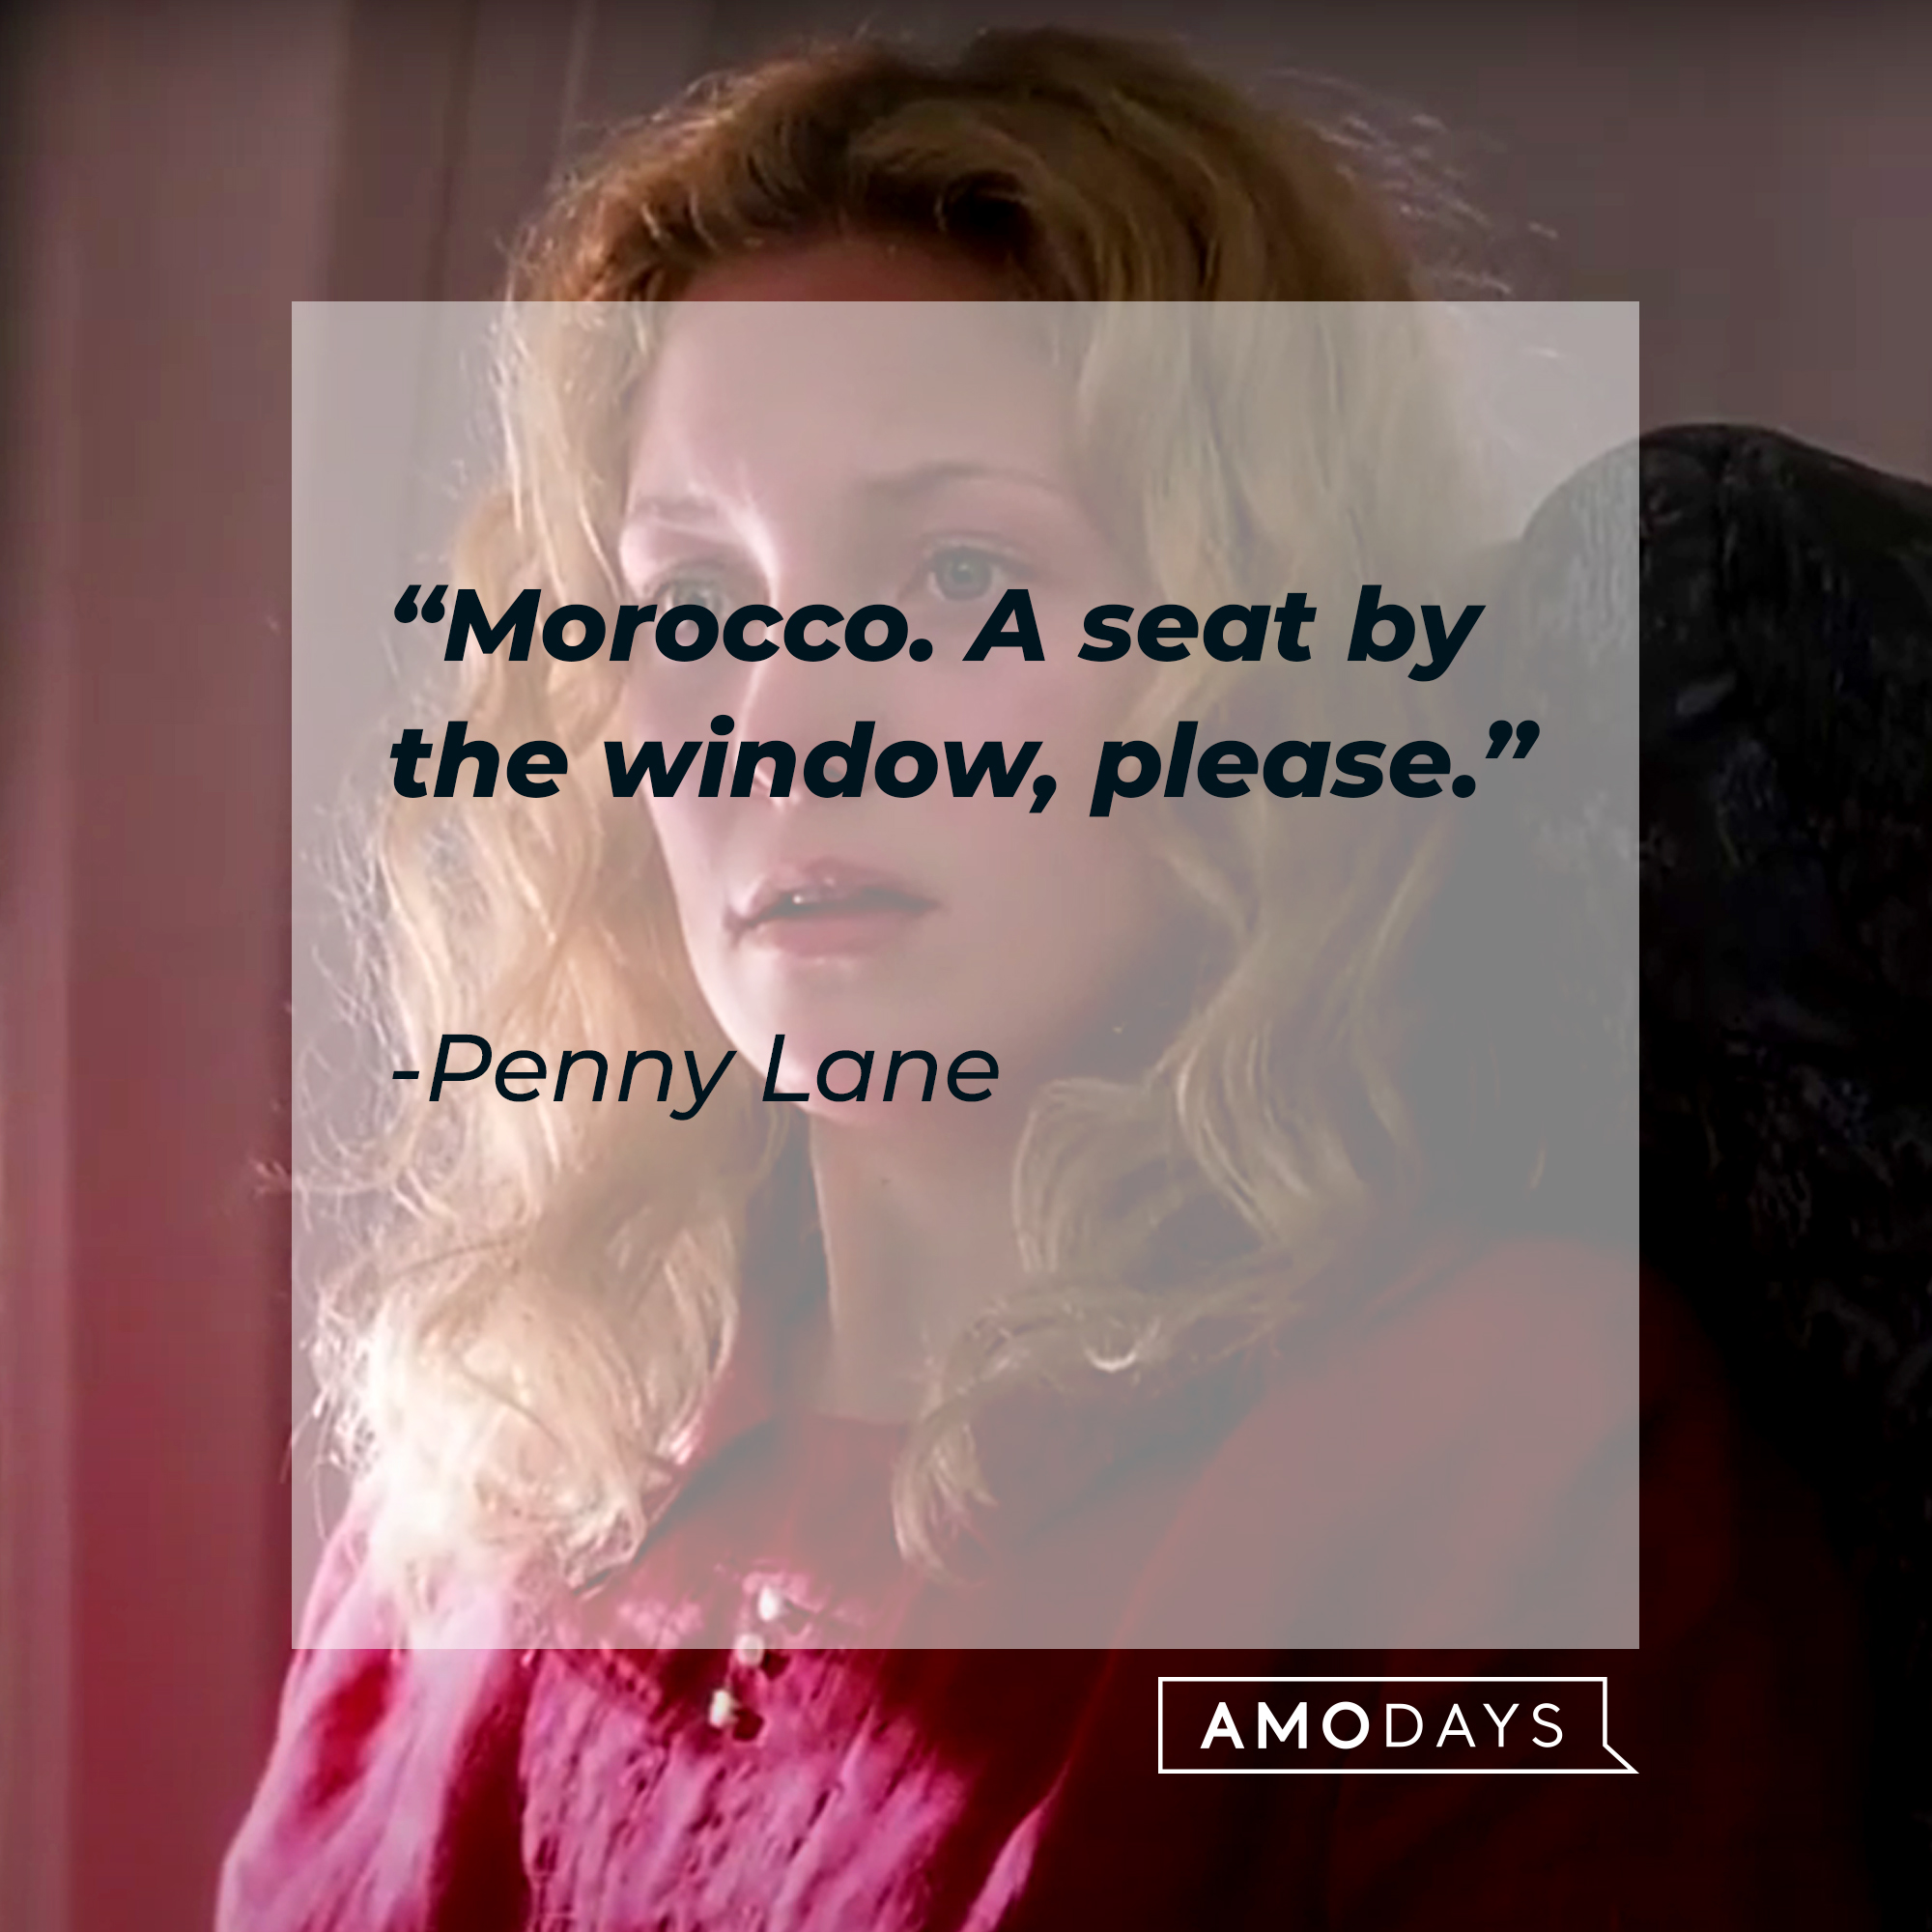 Penny Lane quote: “Morocco. A seat by the window, please.” | Source: facebook.com/AlmostFamousTheMovie